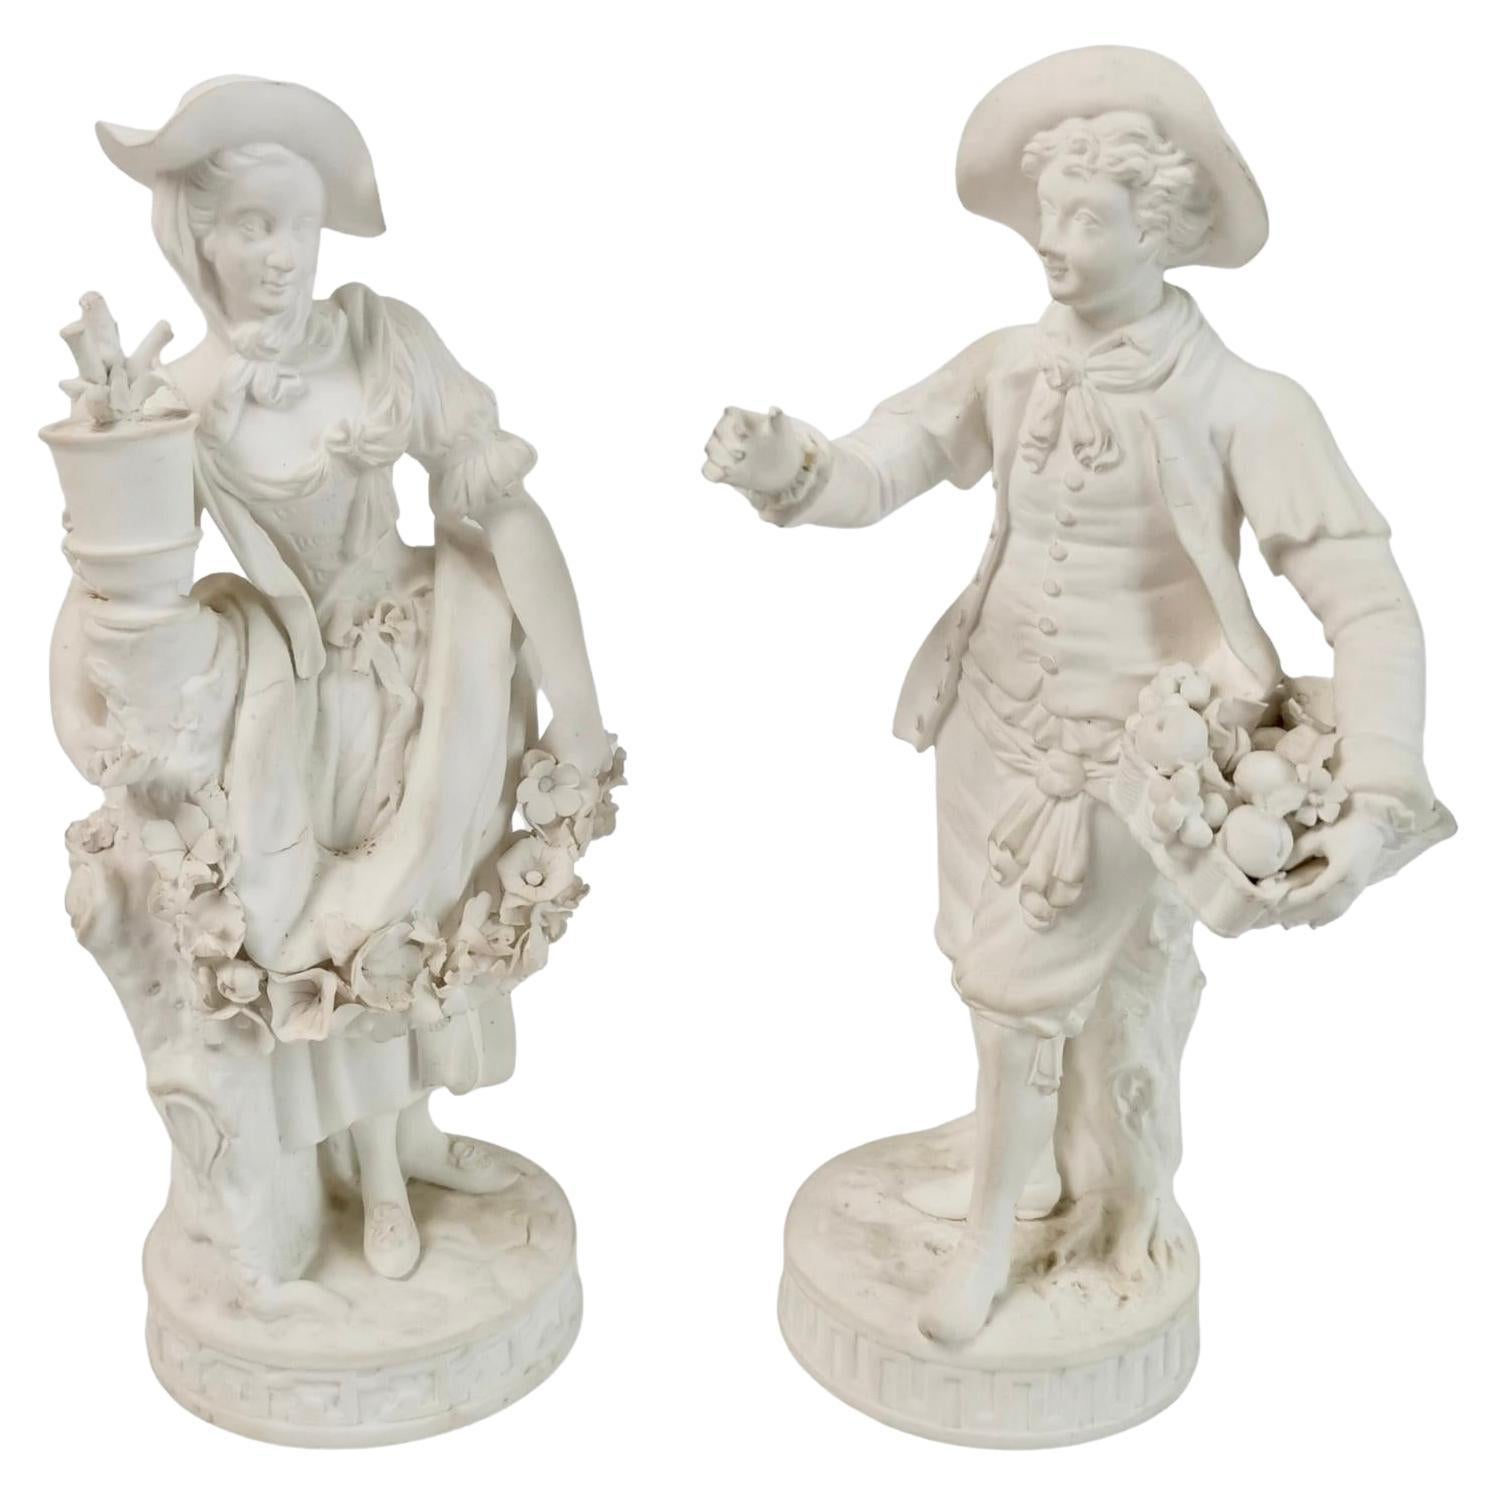 Minton Pair of White Biscuit Figures of Gardener and Lady, ca 1835 For Sale